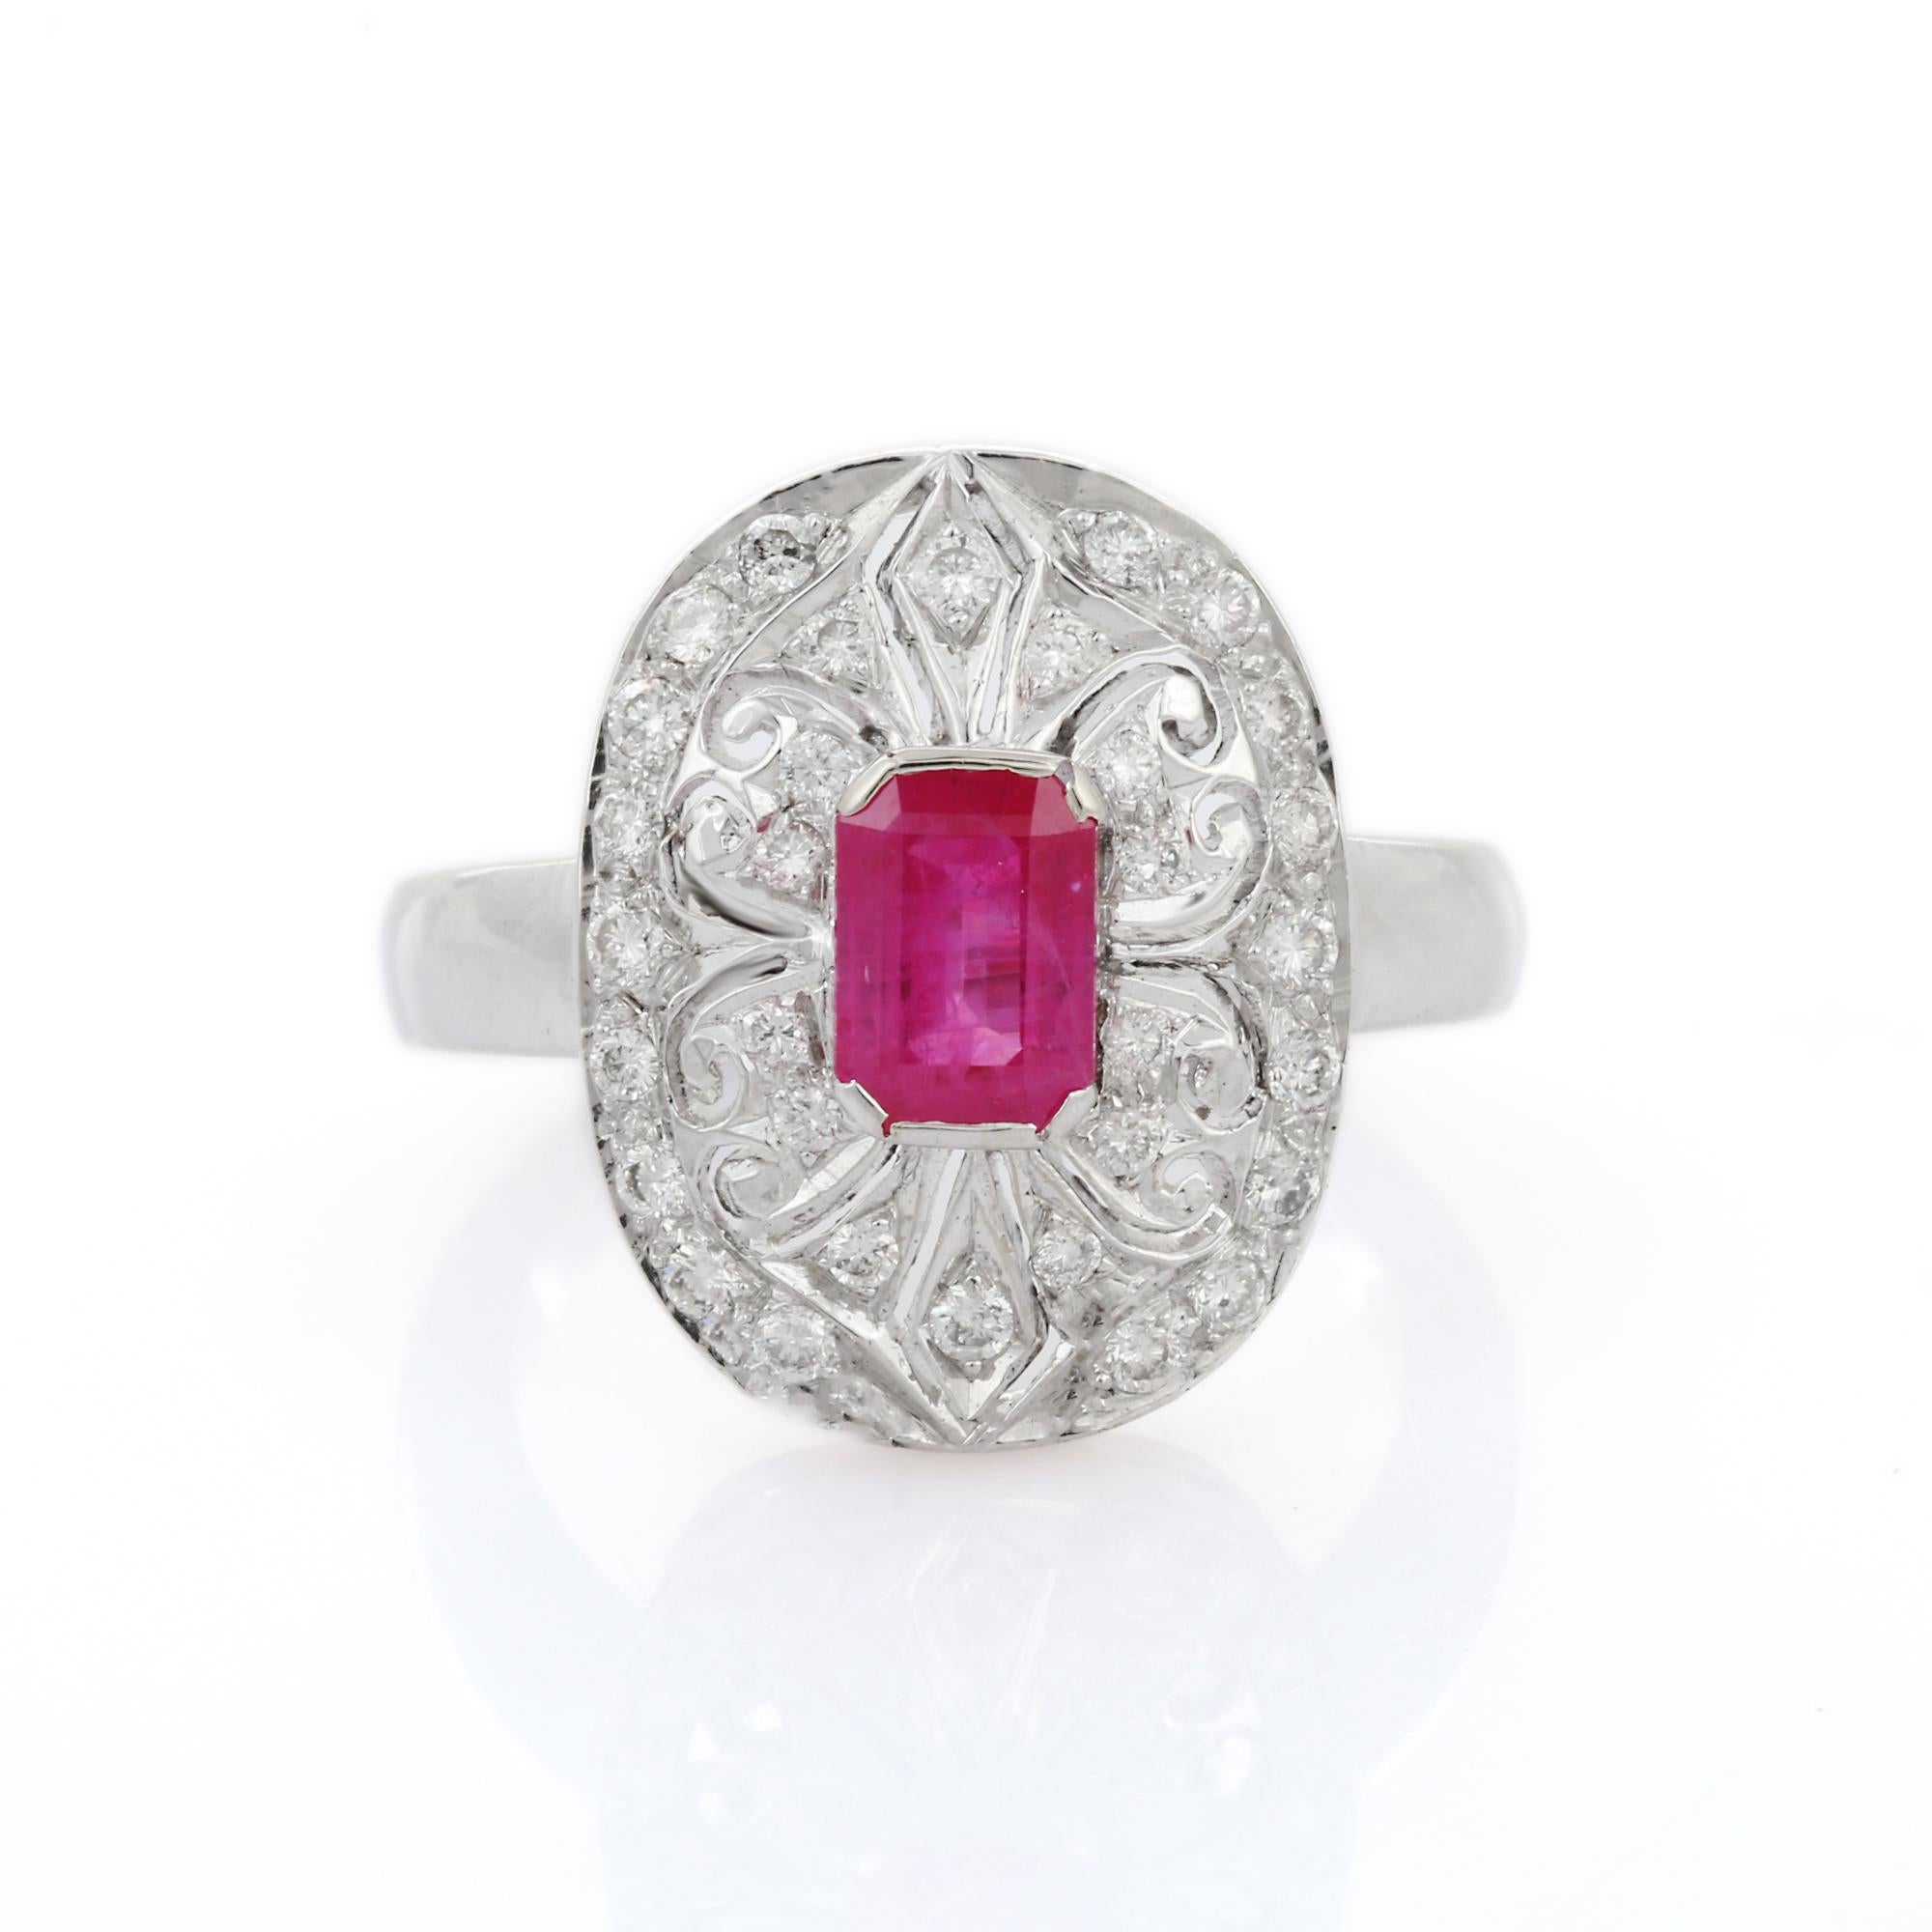 For Sale:  Clustered Diamond Cocktail Ring with 2.31 Carat Ruby in 18K White Gold Engraving 9